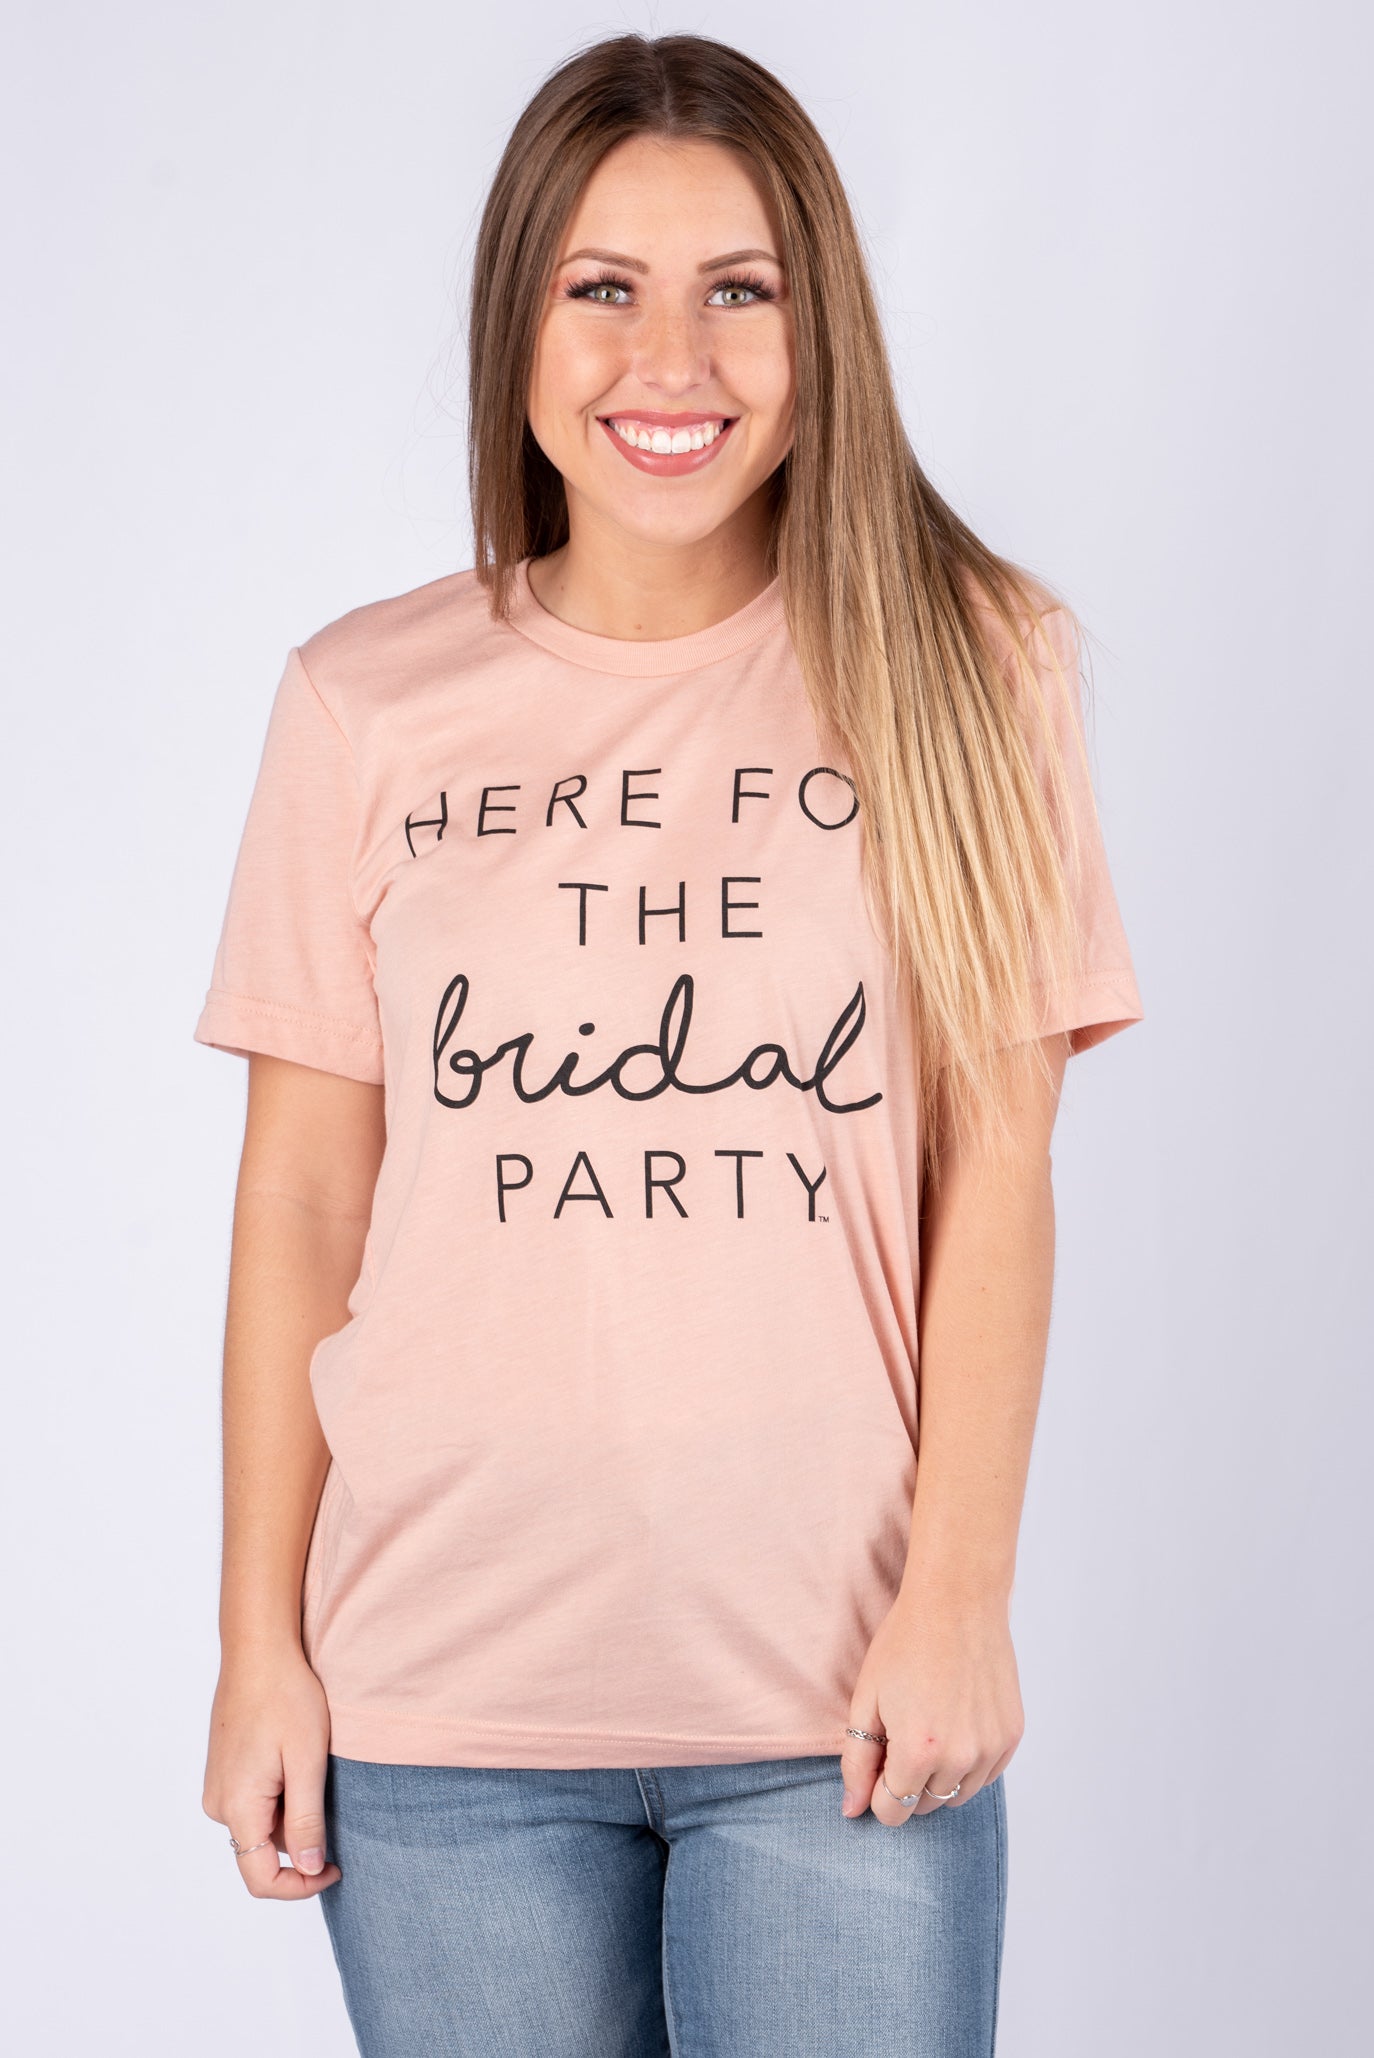 Here for the bridal party unisex short sleeve t-shirt peach - Stylish T-shirts - Trendy Graphic T-Shirts and Tank Tops at Lush Fashion Lounge Boutique in Oklahoma City